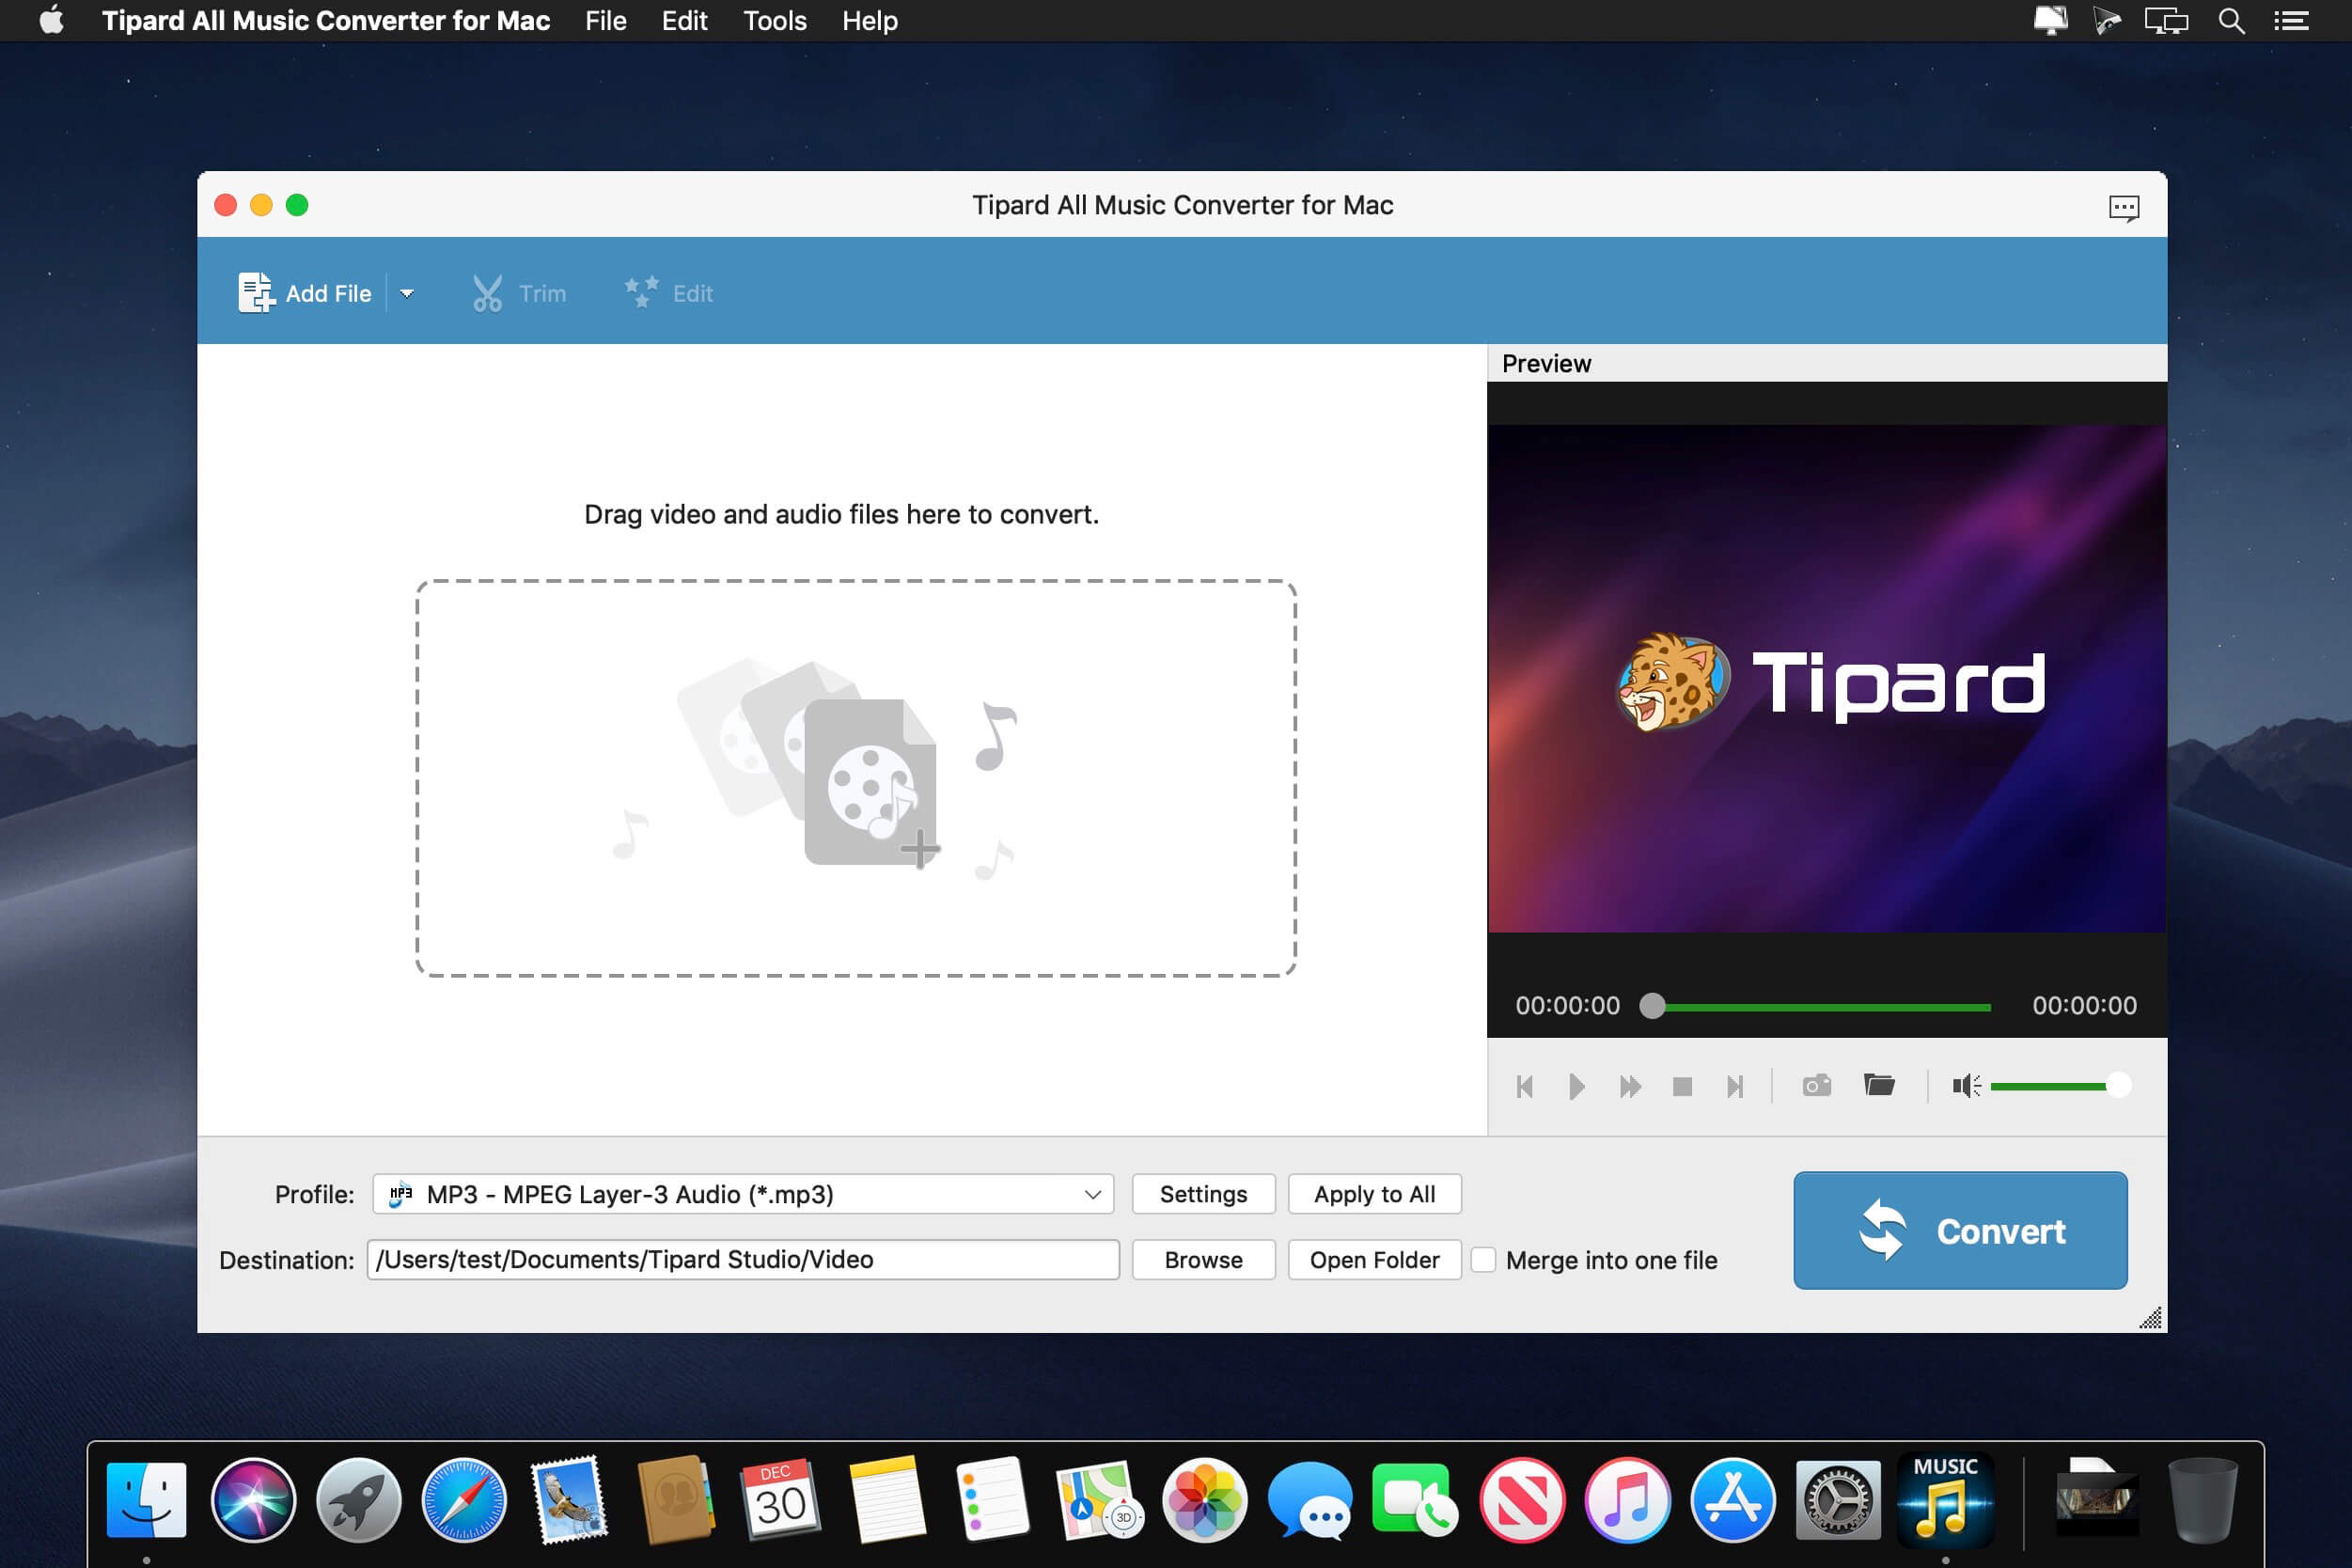 1577707901_tipard-all-music-converter_01